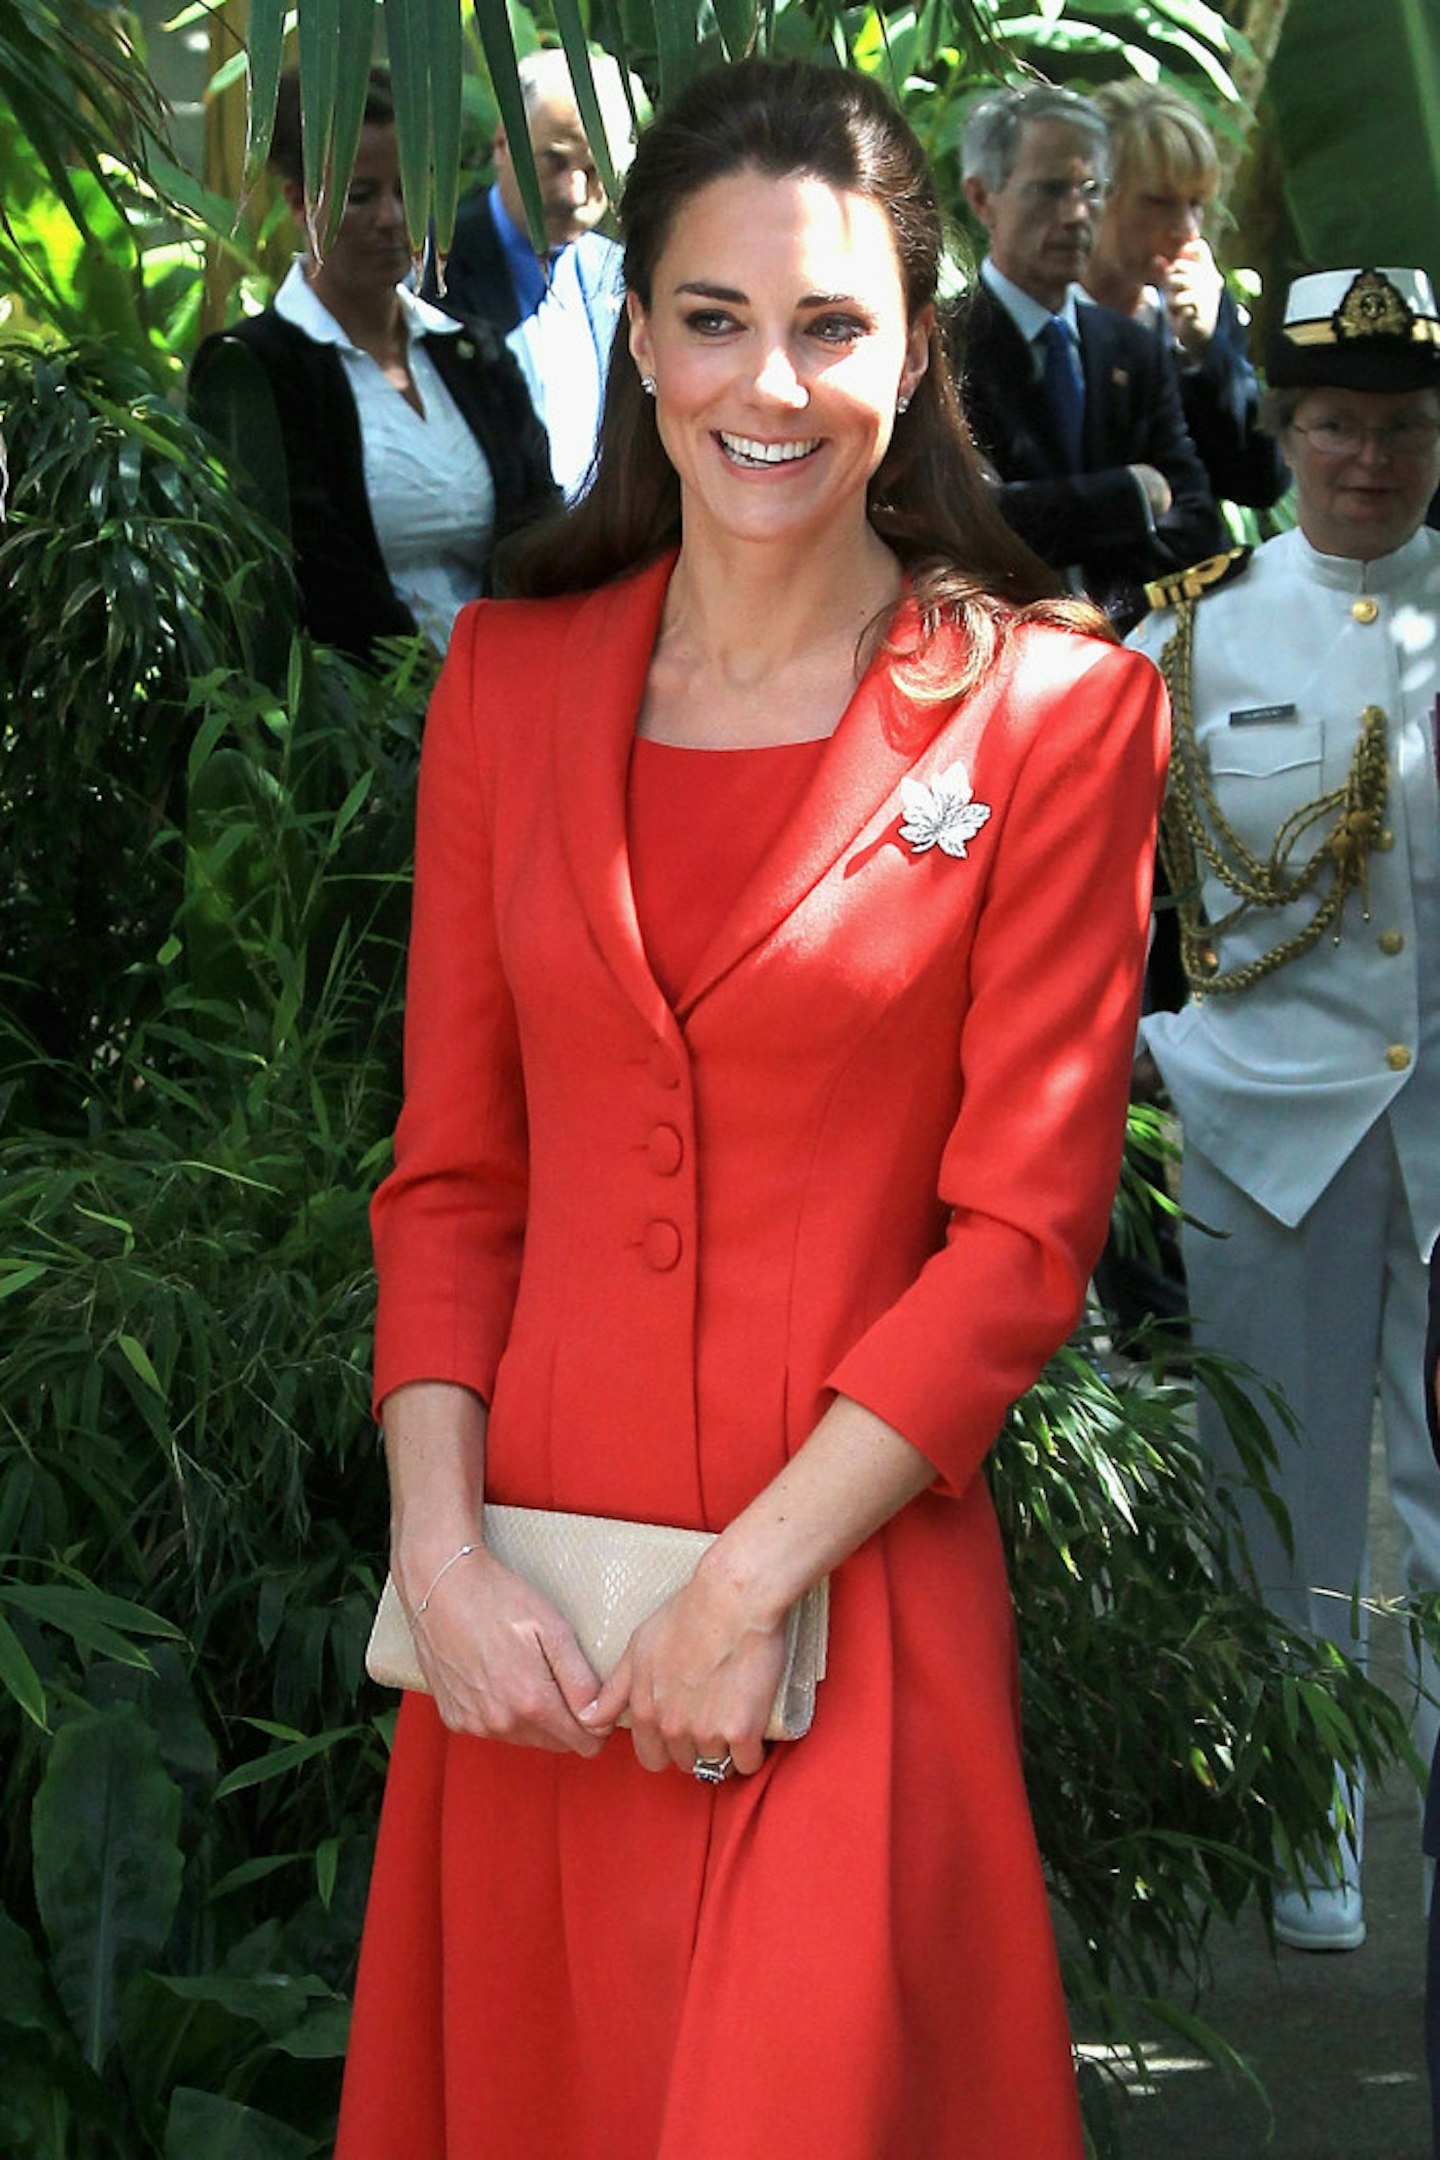 The Duchess Of Cambridge Canadian Tour, 8 July 2011